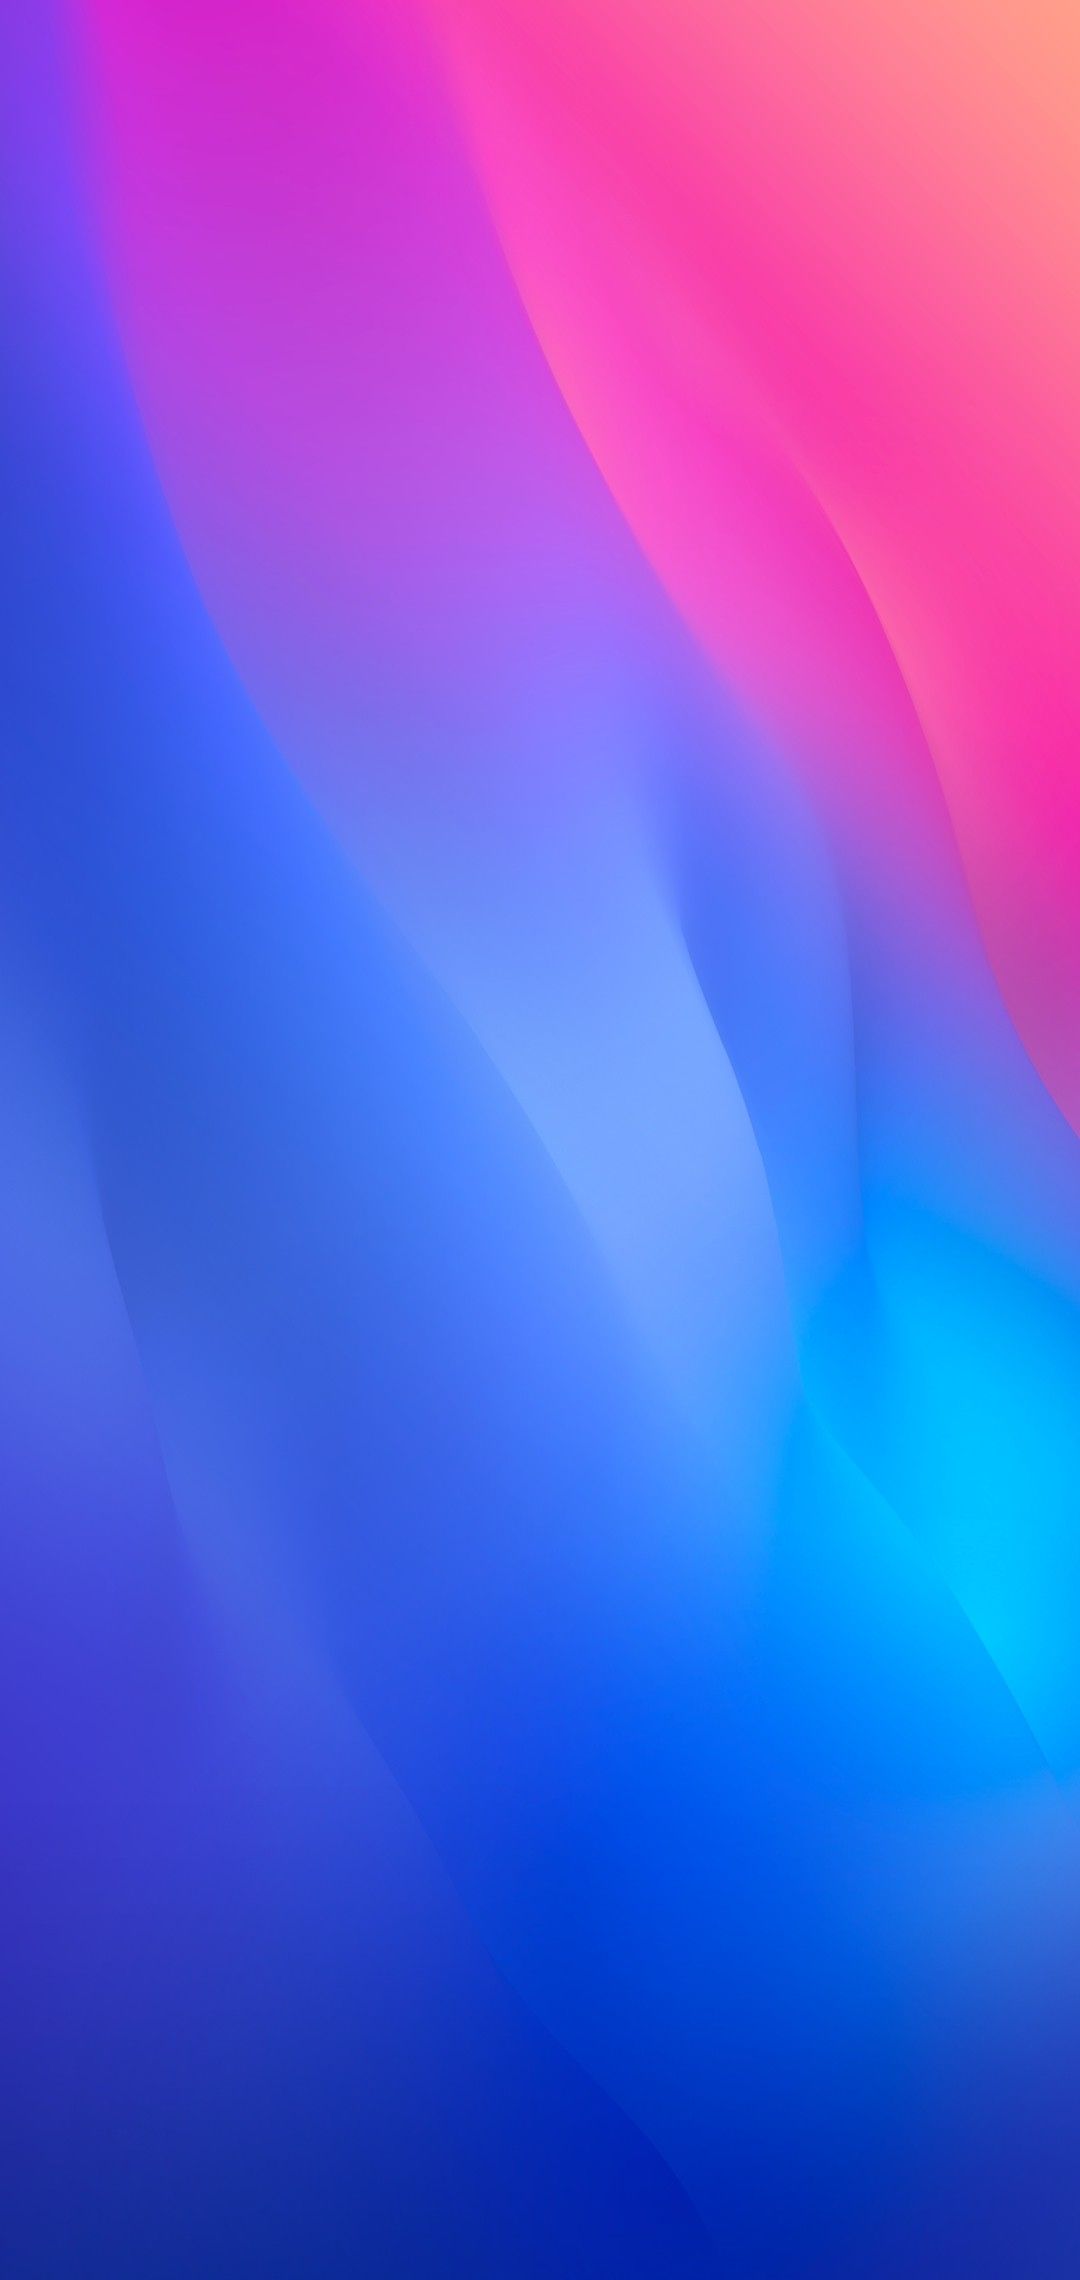 iOS iPhone X, blue, pink, clean, simple, abstract, apple, wallpaper, iphone clean, beauty, colou. Pink wallpaper iphone, Stock wallpaper, iPhone background